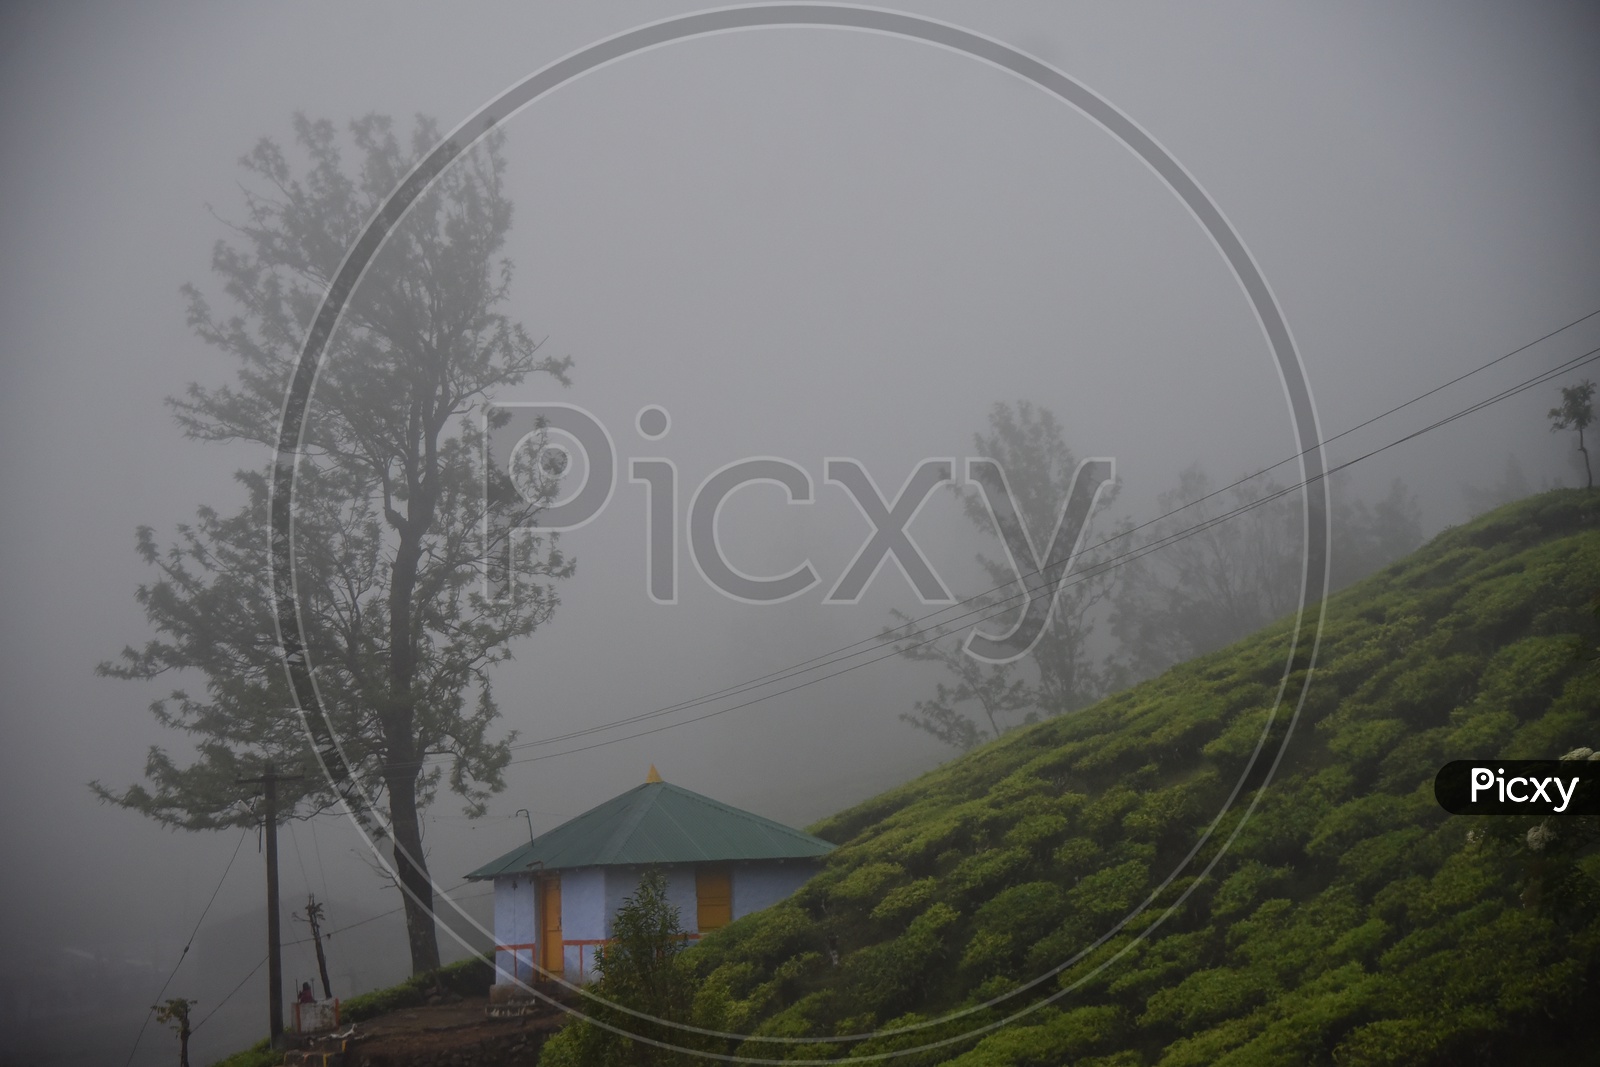 Tea Plantation in Munnar Closeup Shot With Fog Filled Hills in Background